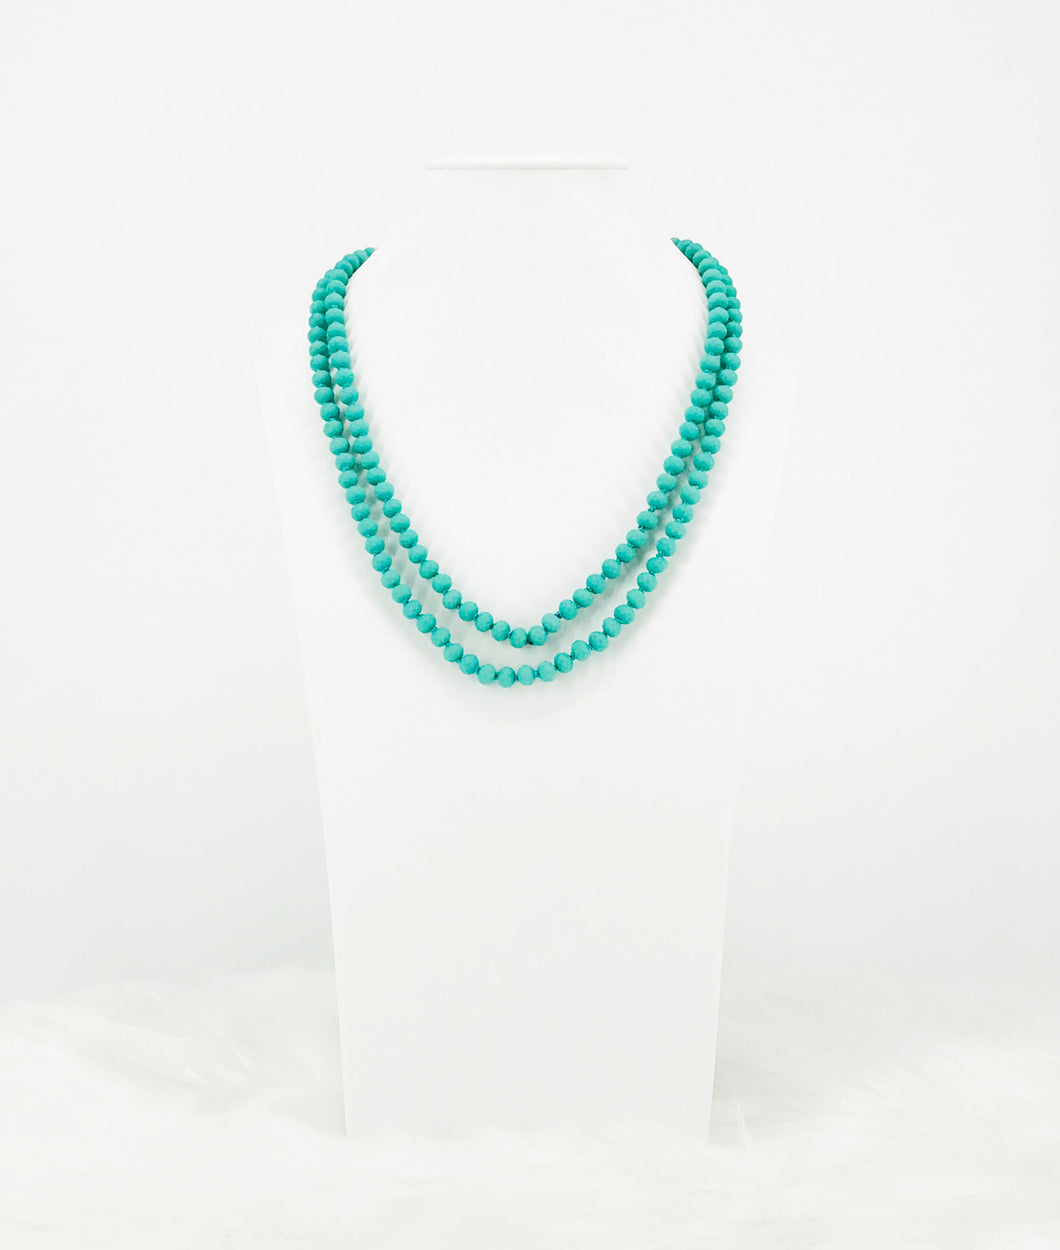 Turquoise Knotted Glass Bead Necklace - N332